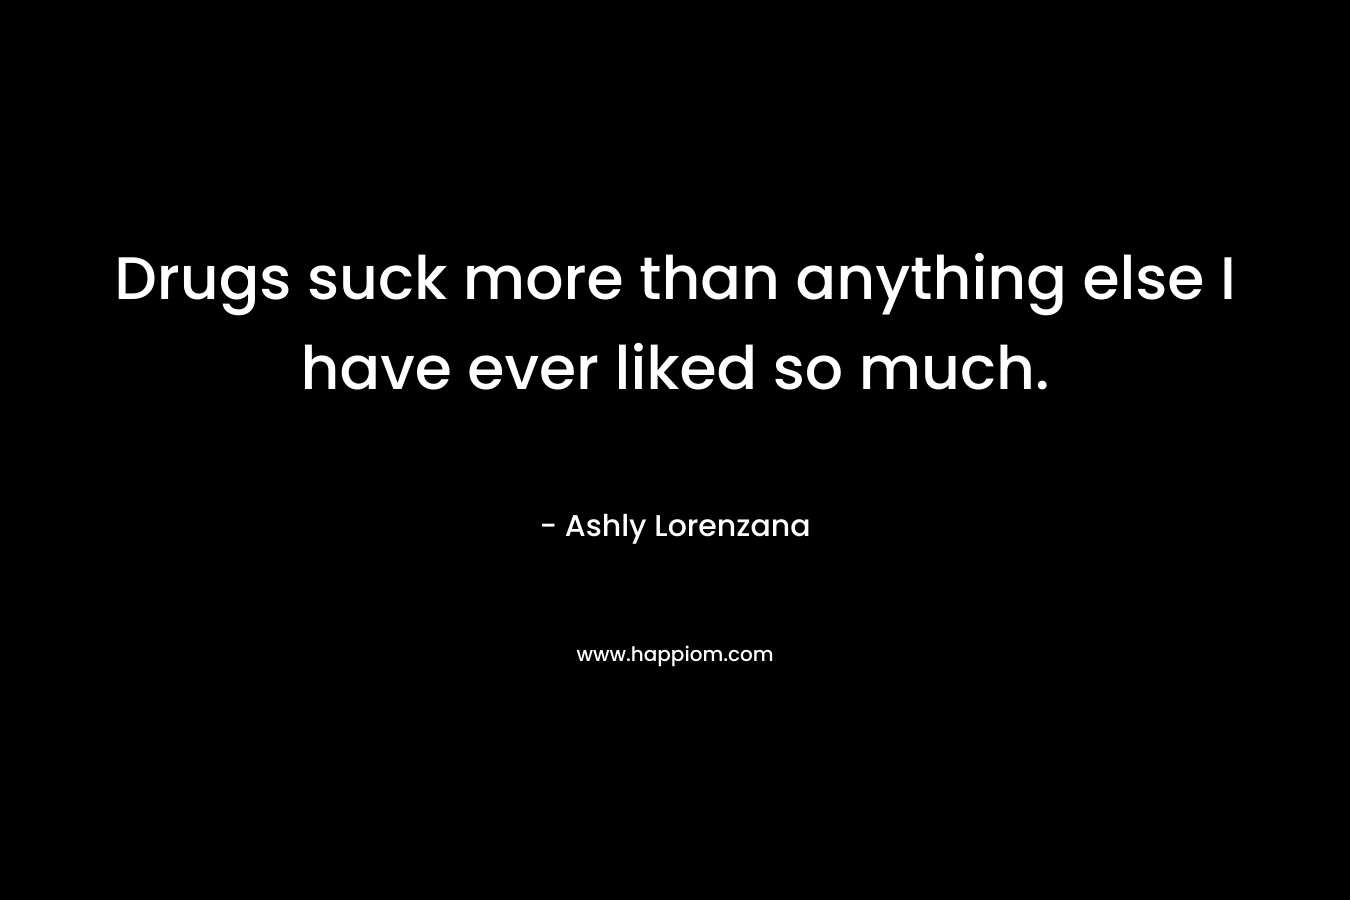 Drugs suck more than anything else I have ever liked so much. – Ashly Lorenzana